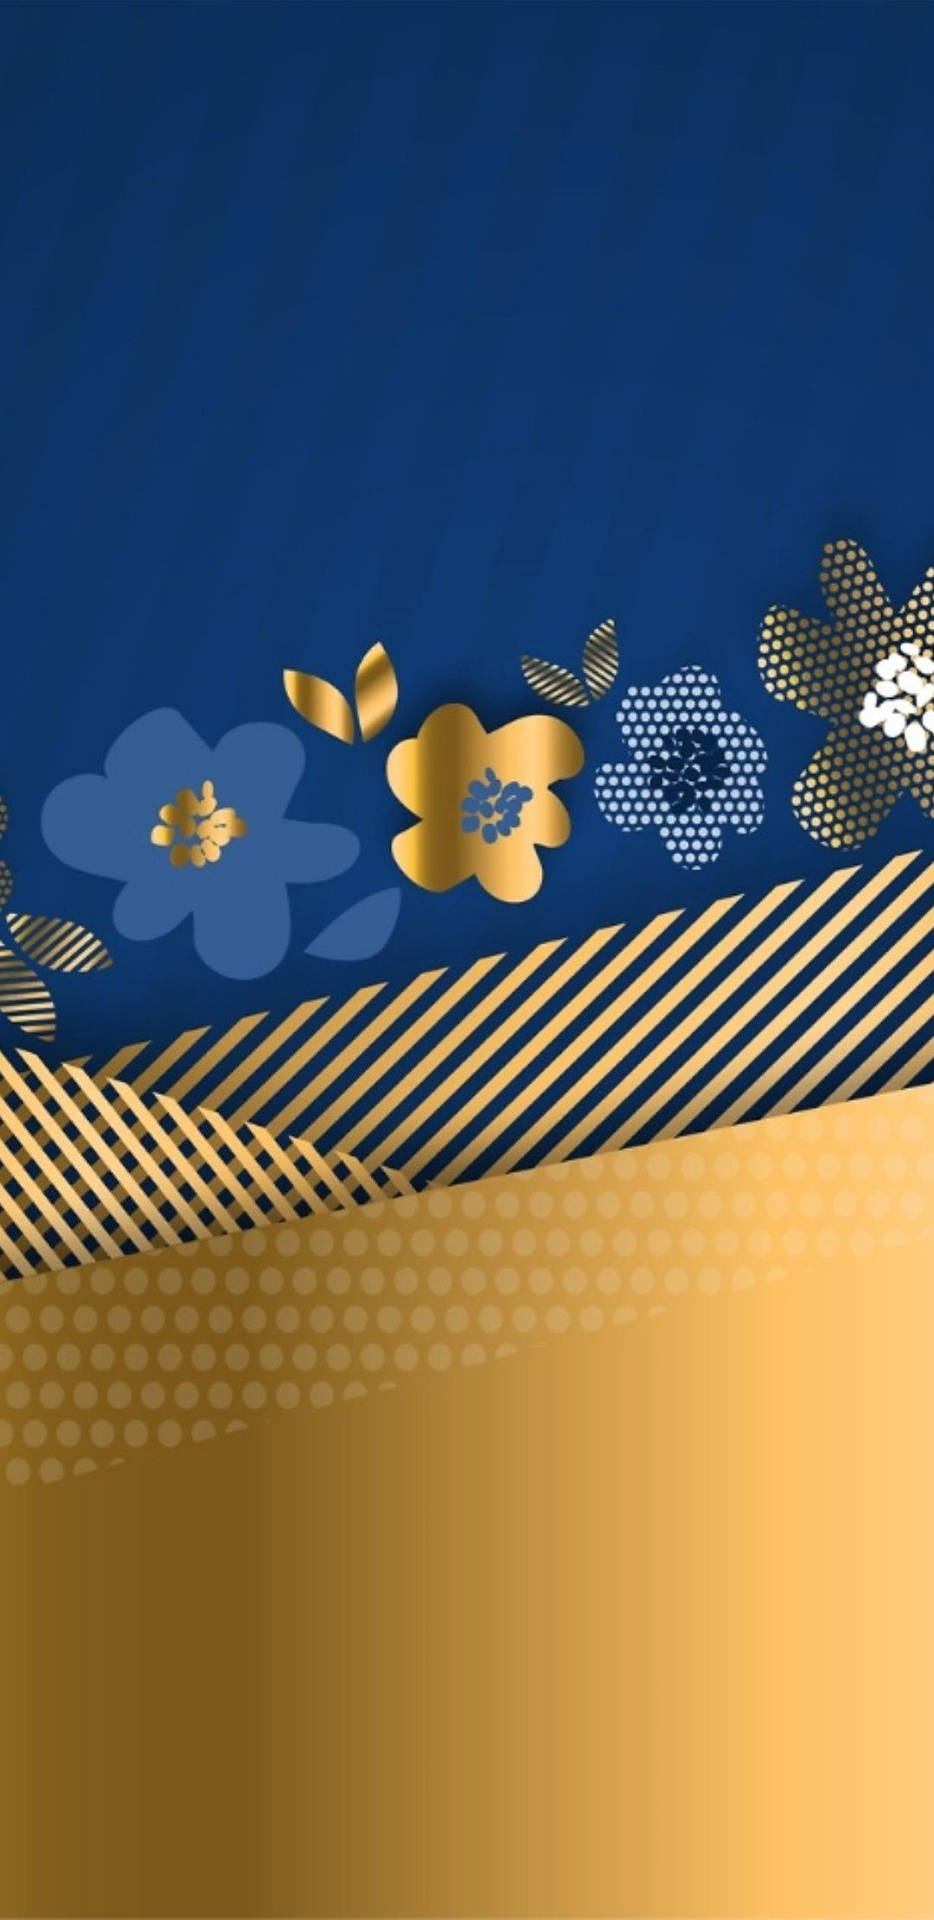 Blue And Gold Flowers Wallpaper